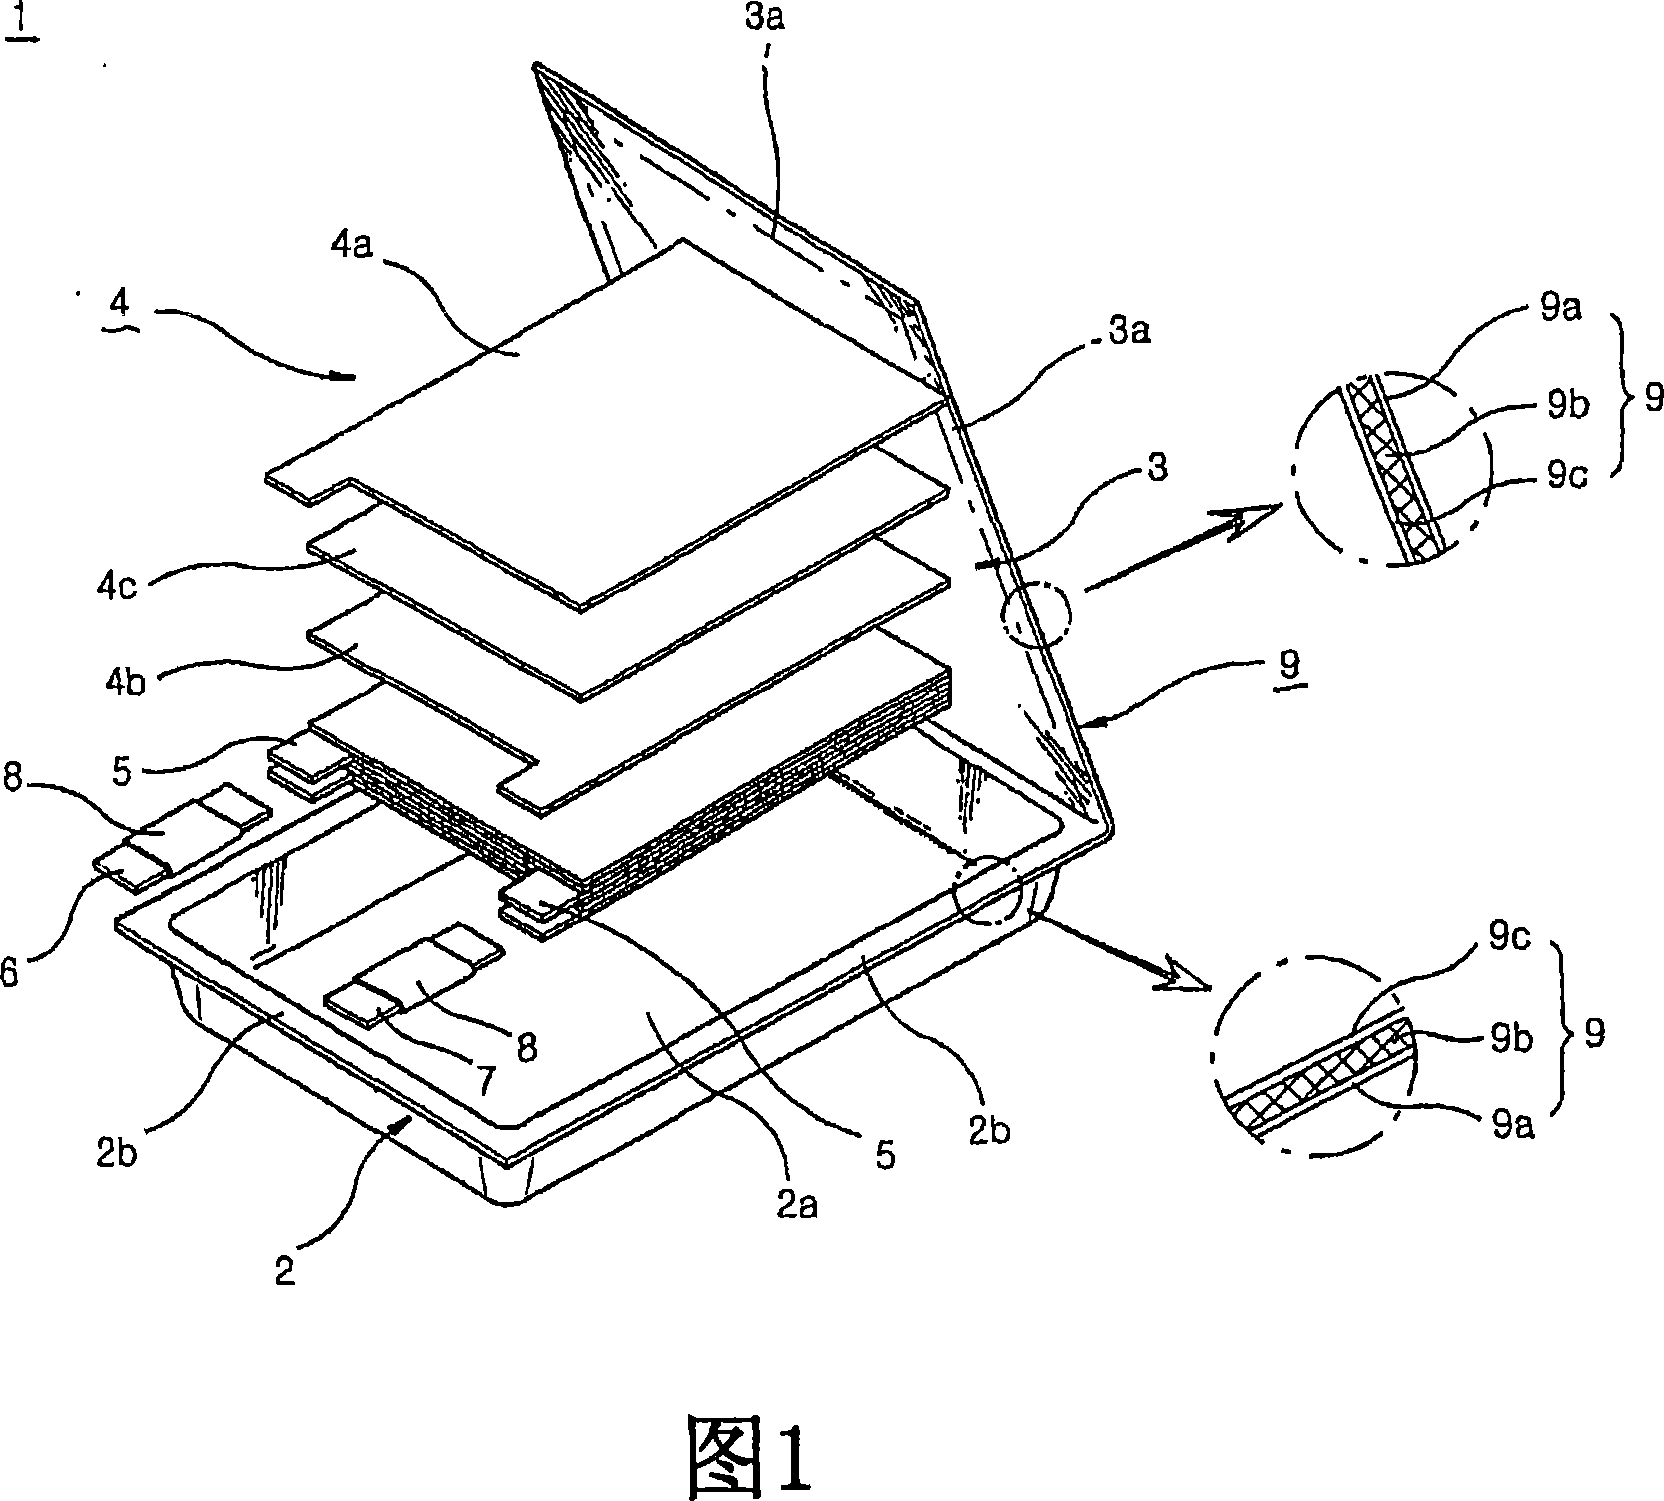 Secondary battery employing battery case of high strength